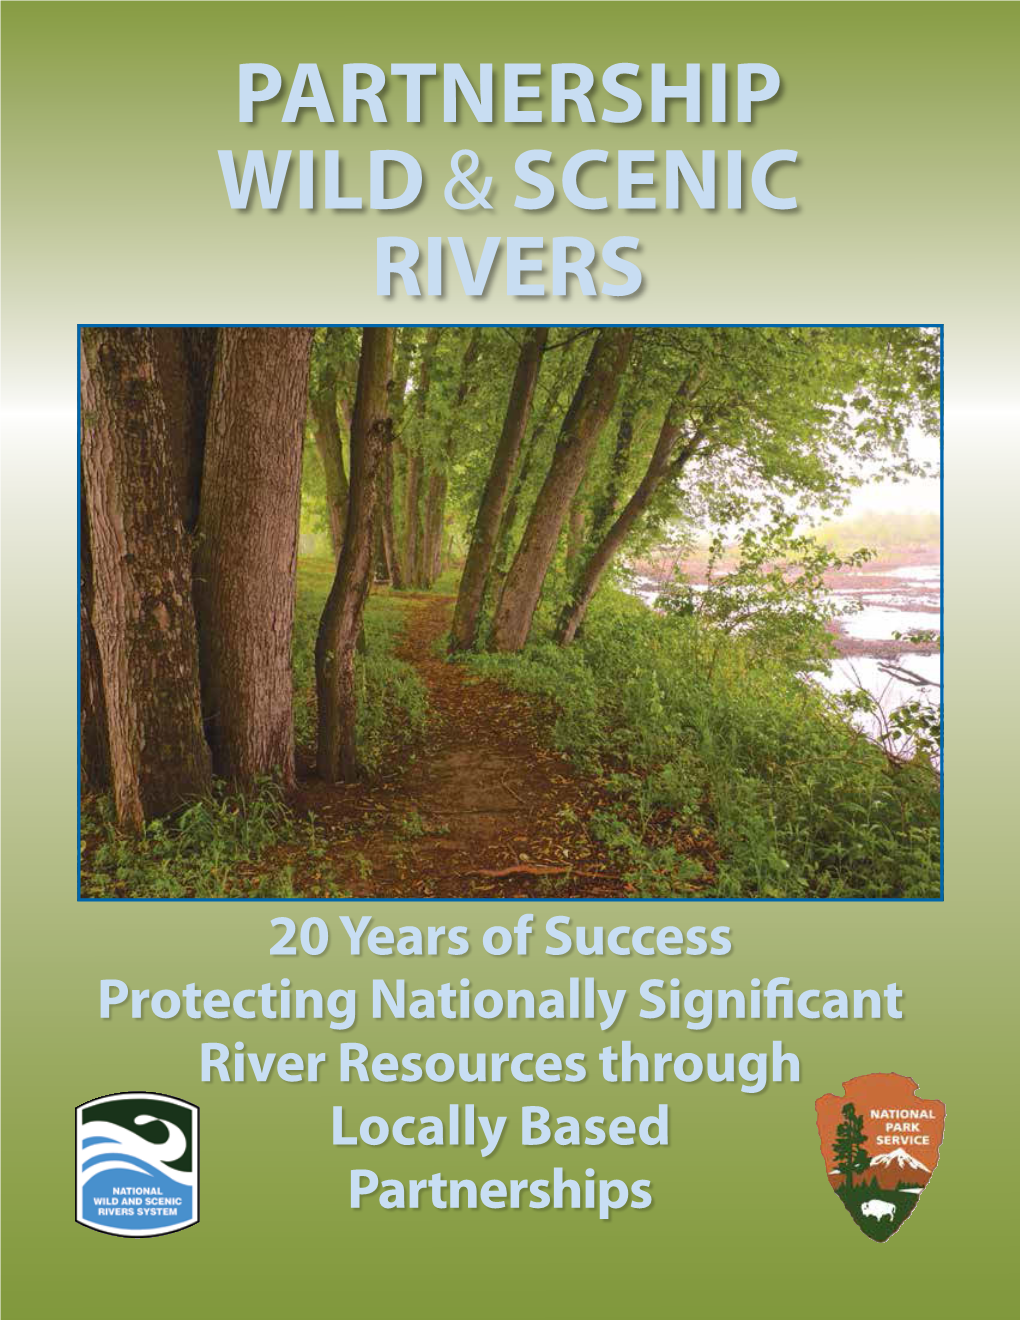 Partnership Wild and Scenic Rivers